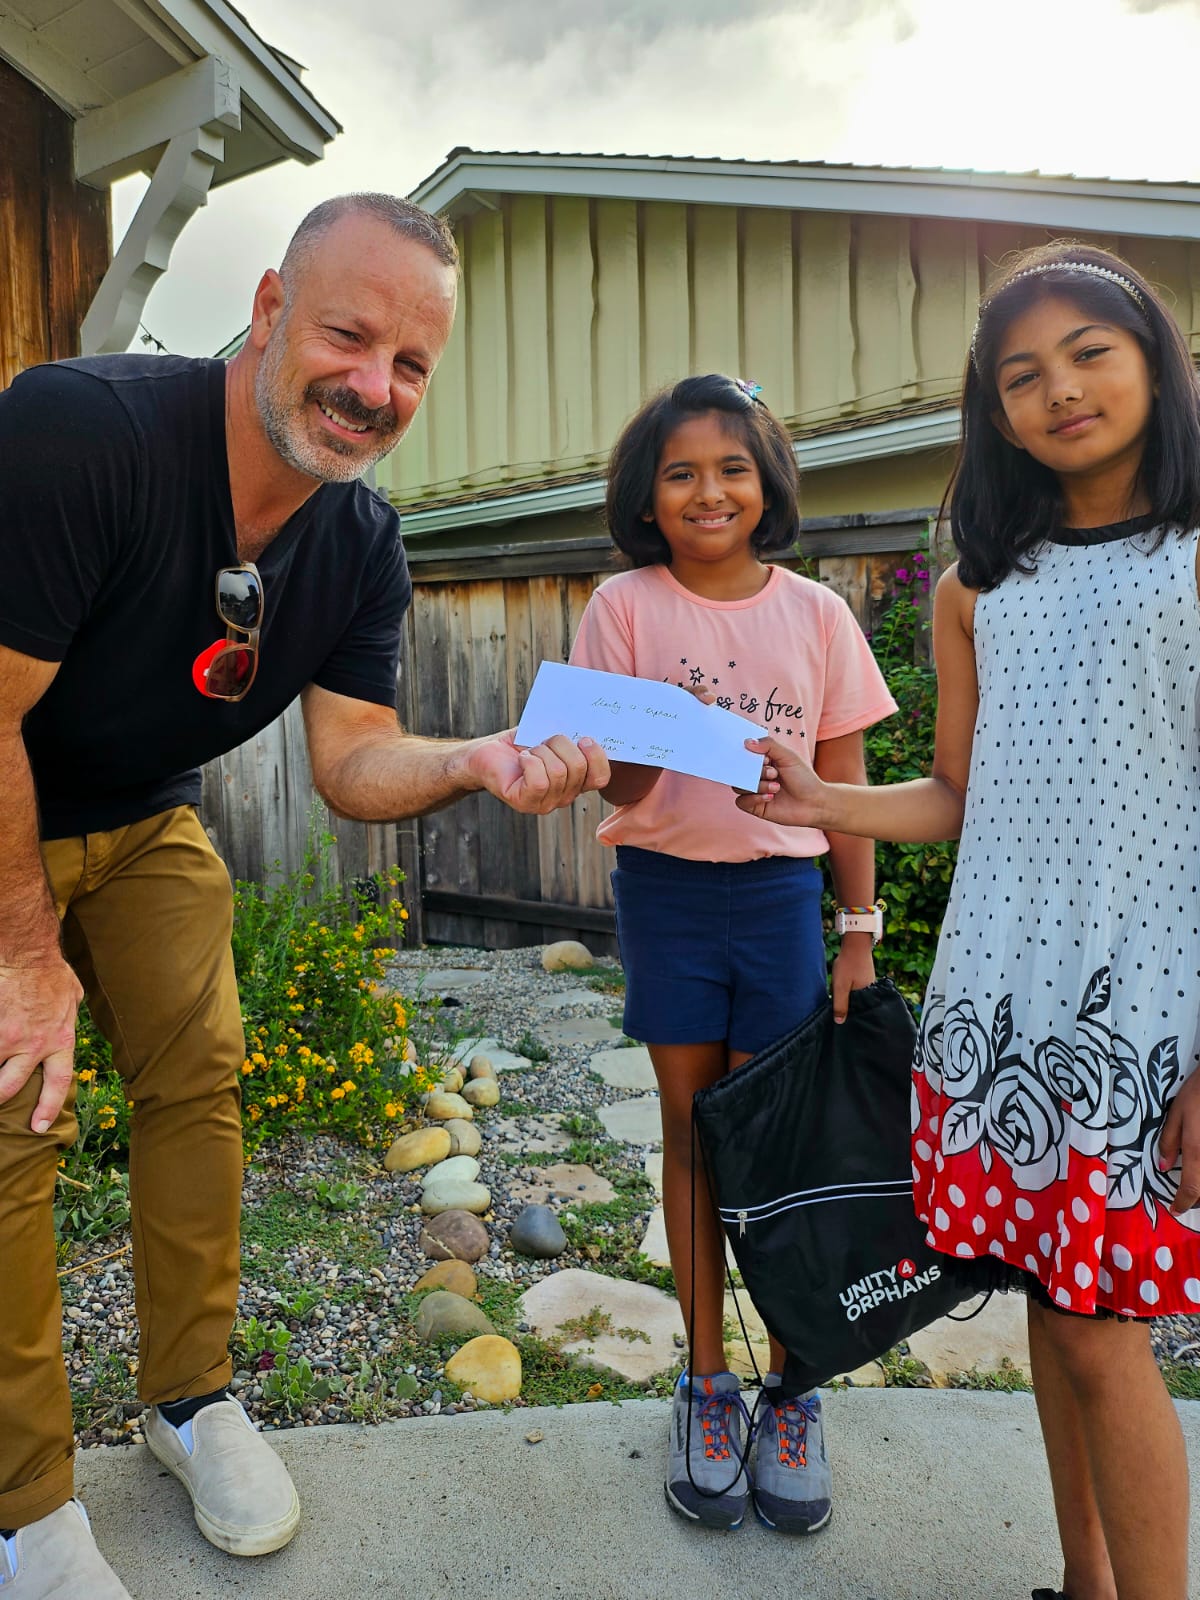 U4O's founder, Joe, with two kids, Aashi and Aanya at their lemonade stand fundraiser to help vulnerable children.